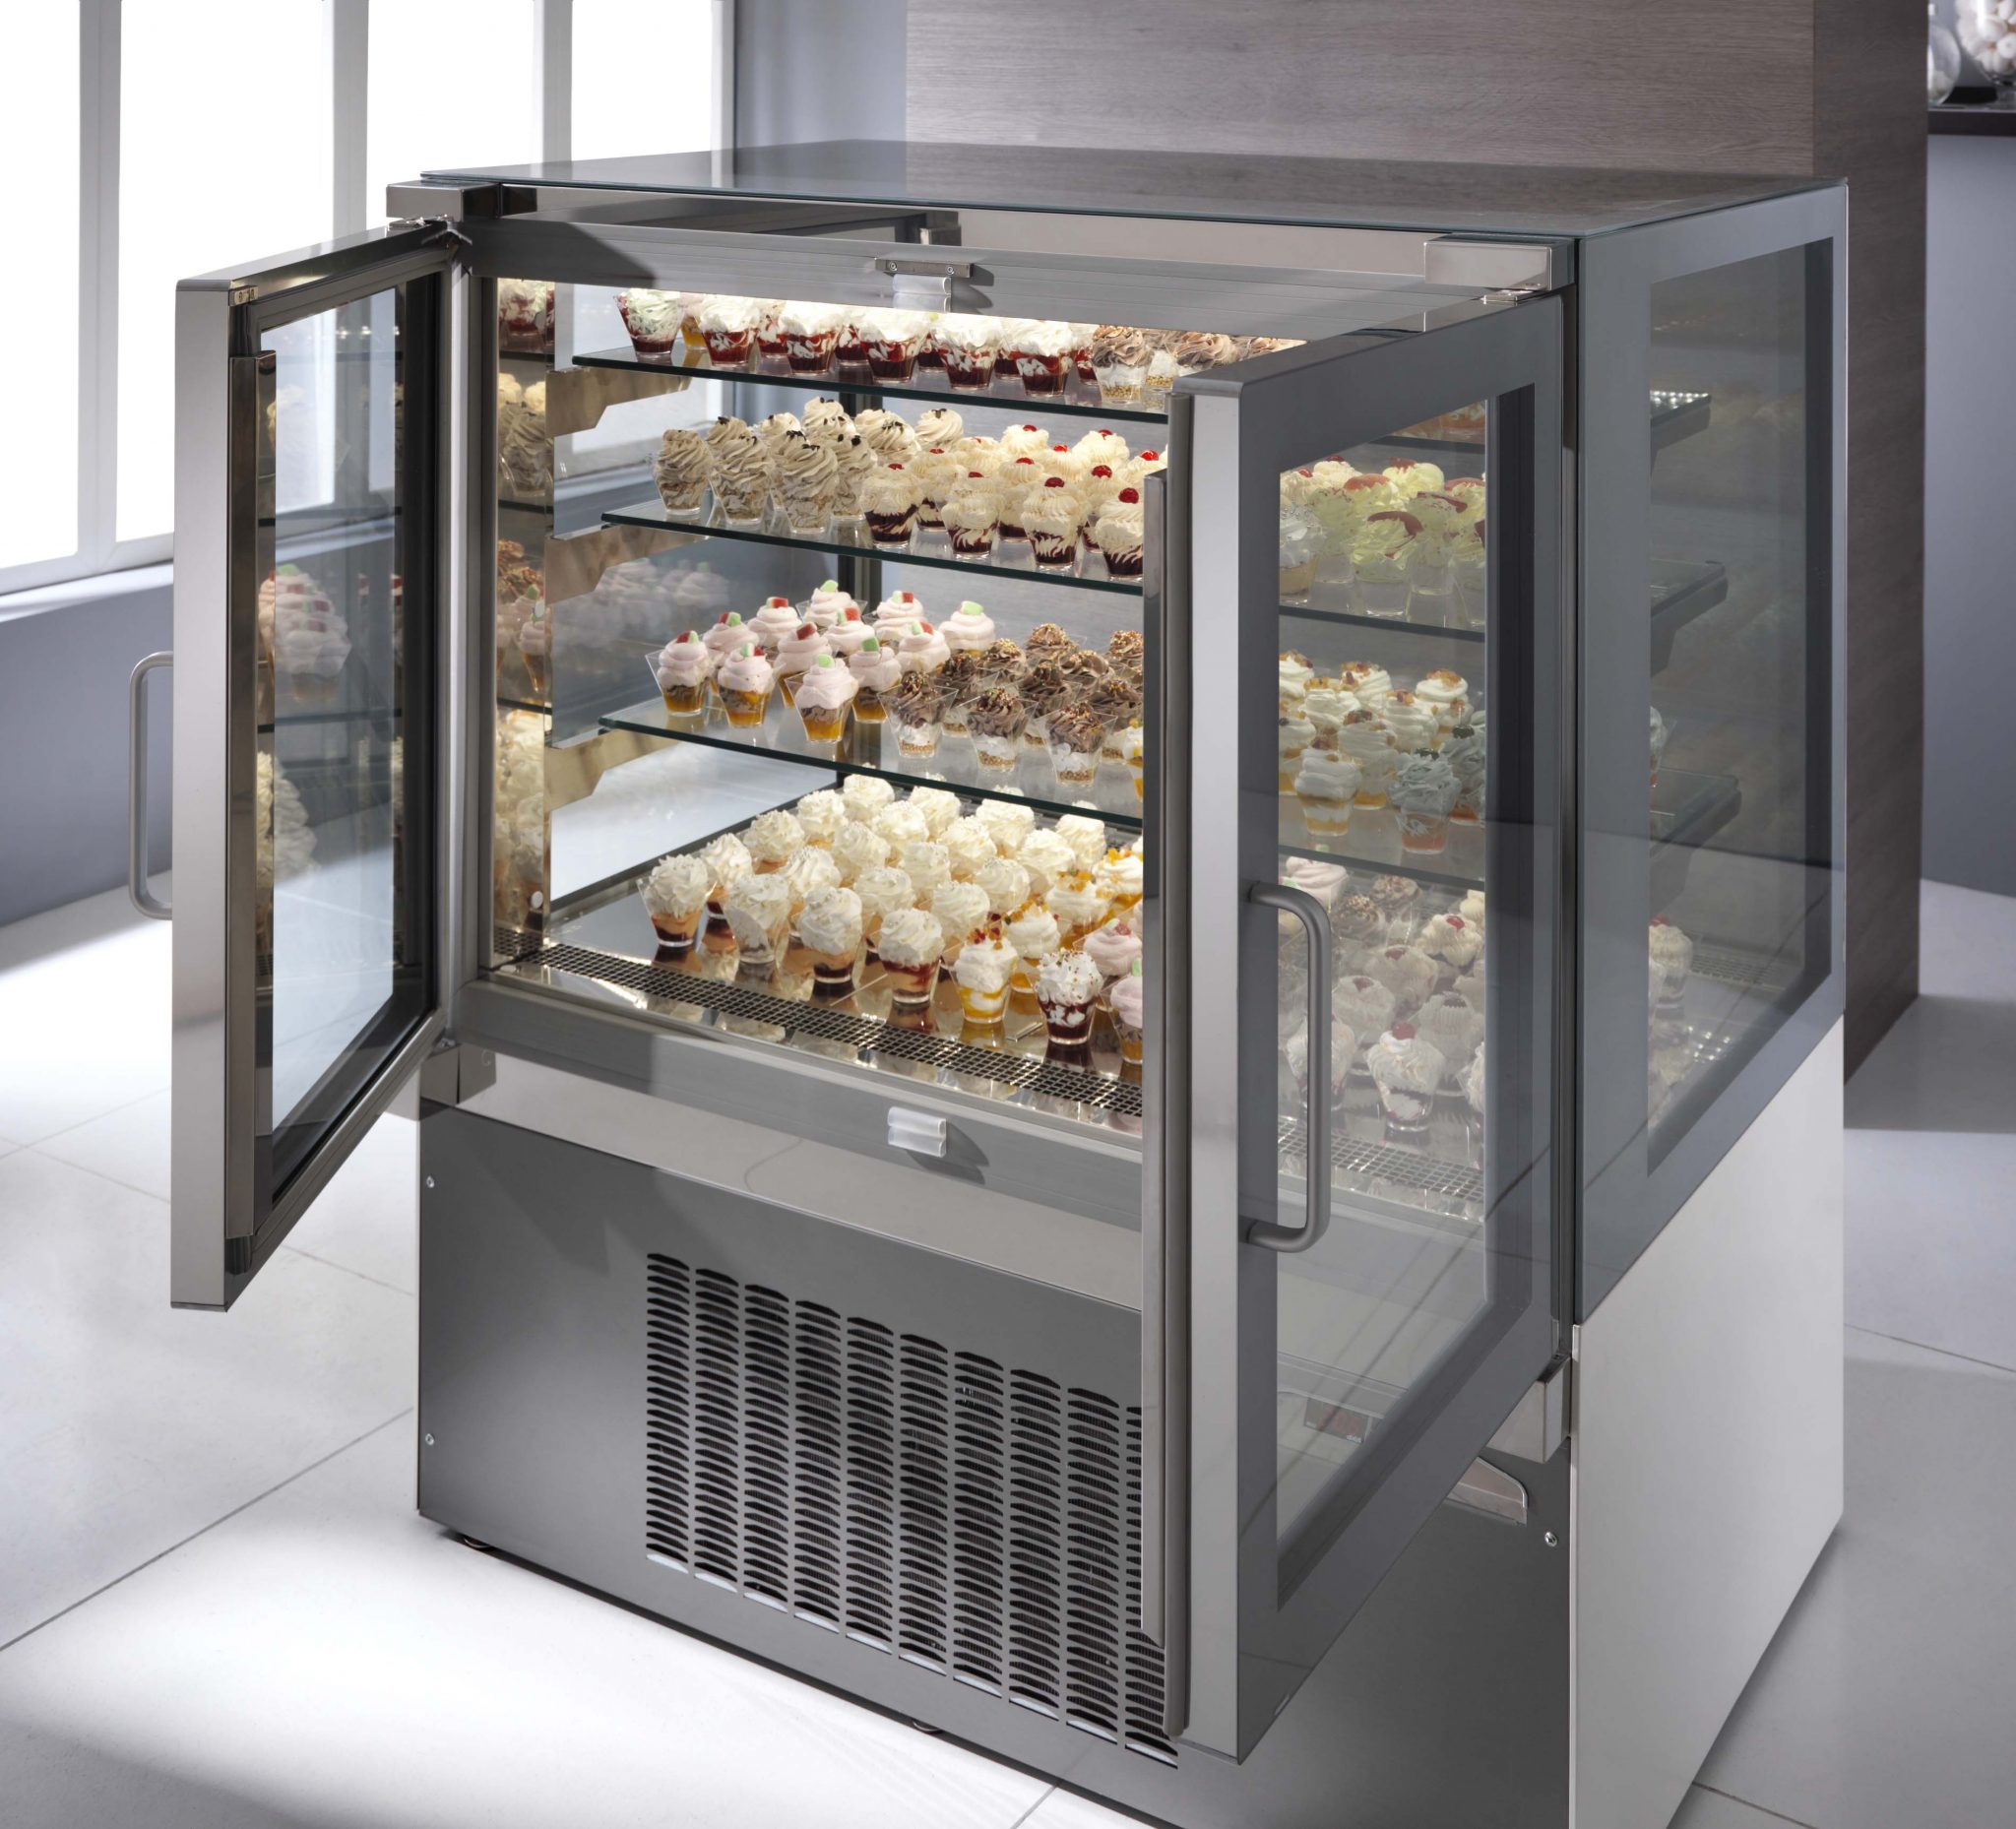 https://advancedgourmet.com/wp-content/uploads/2018/08/TORTUGA-Refrigerated-Self-Service-Pastry-Display-Case.jpg